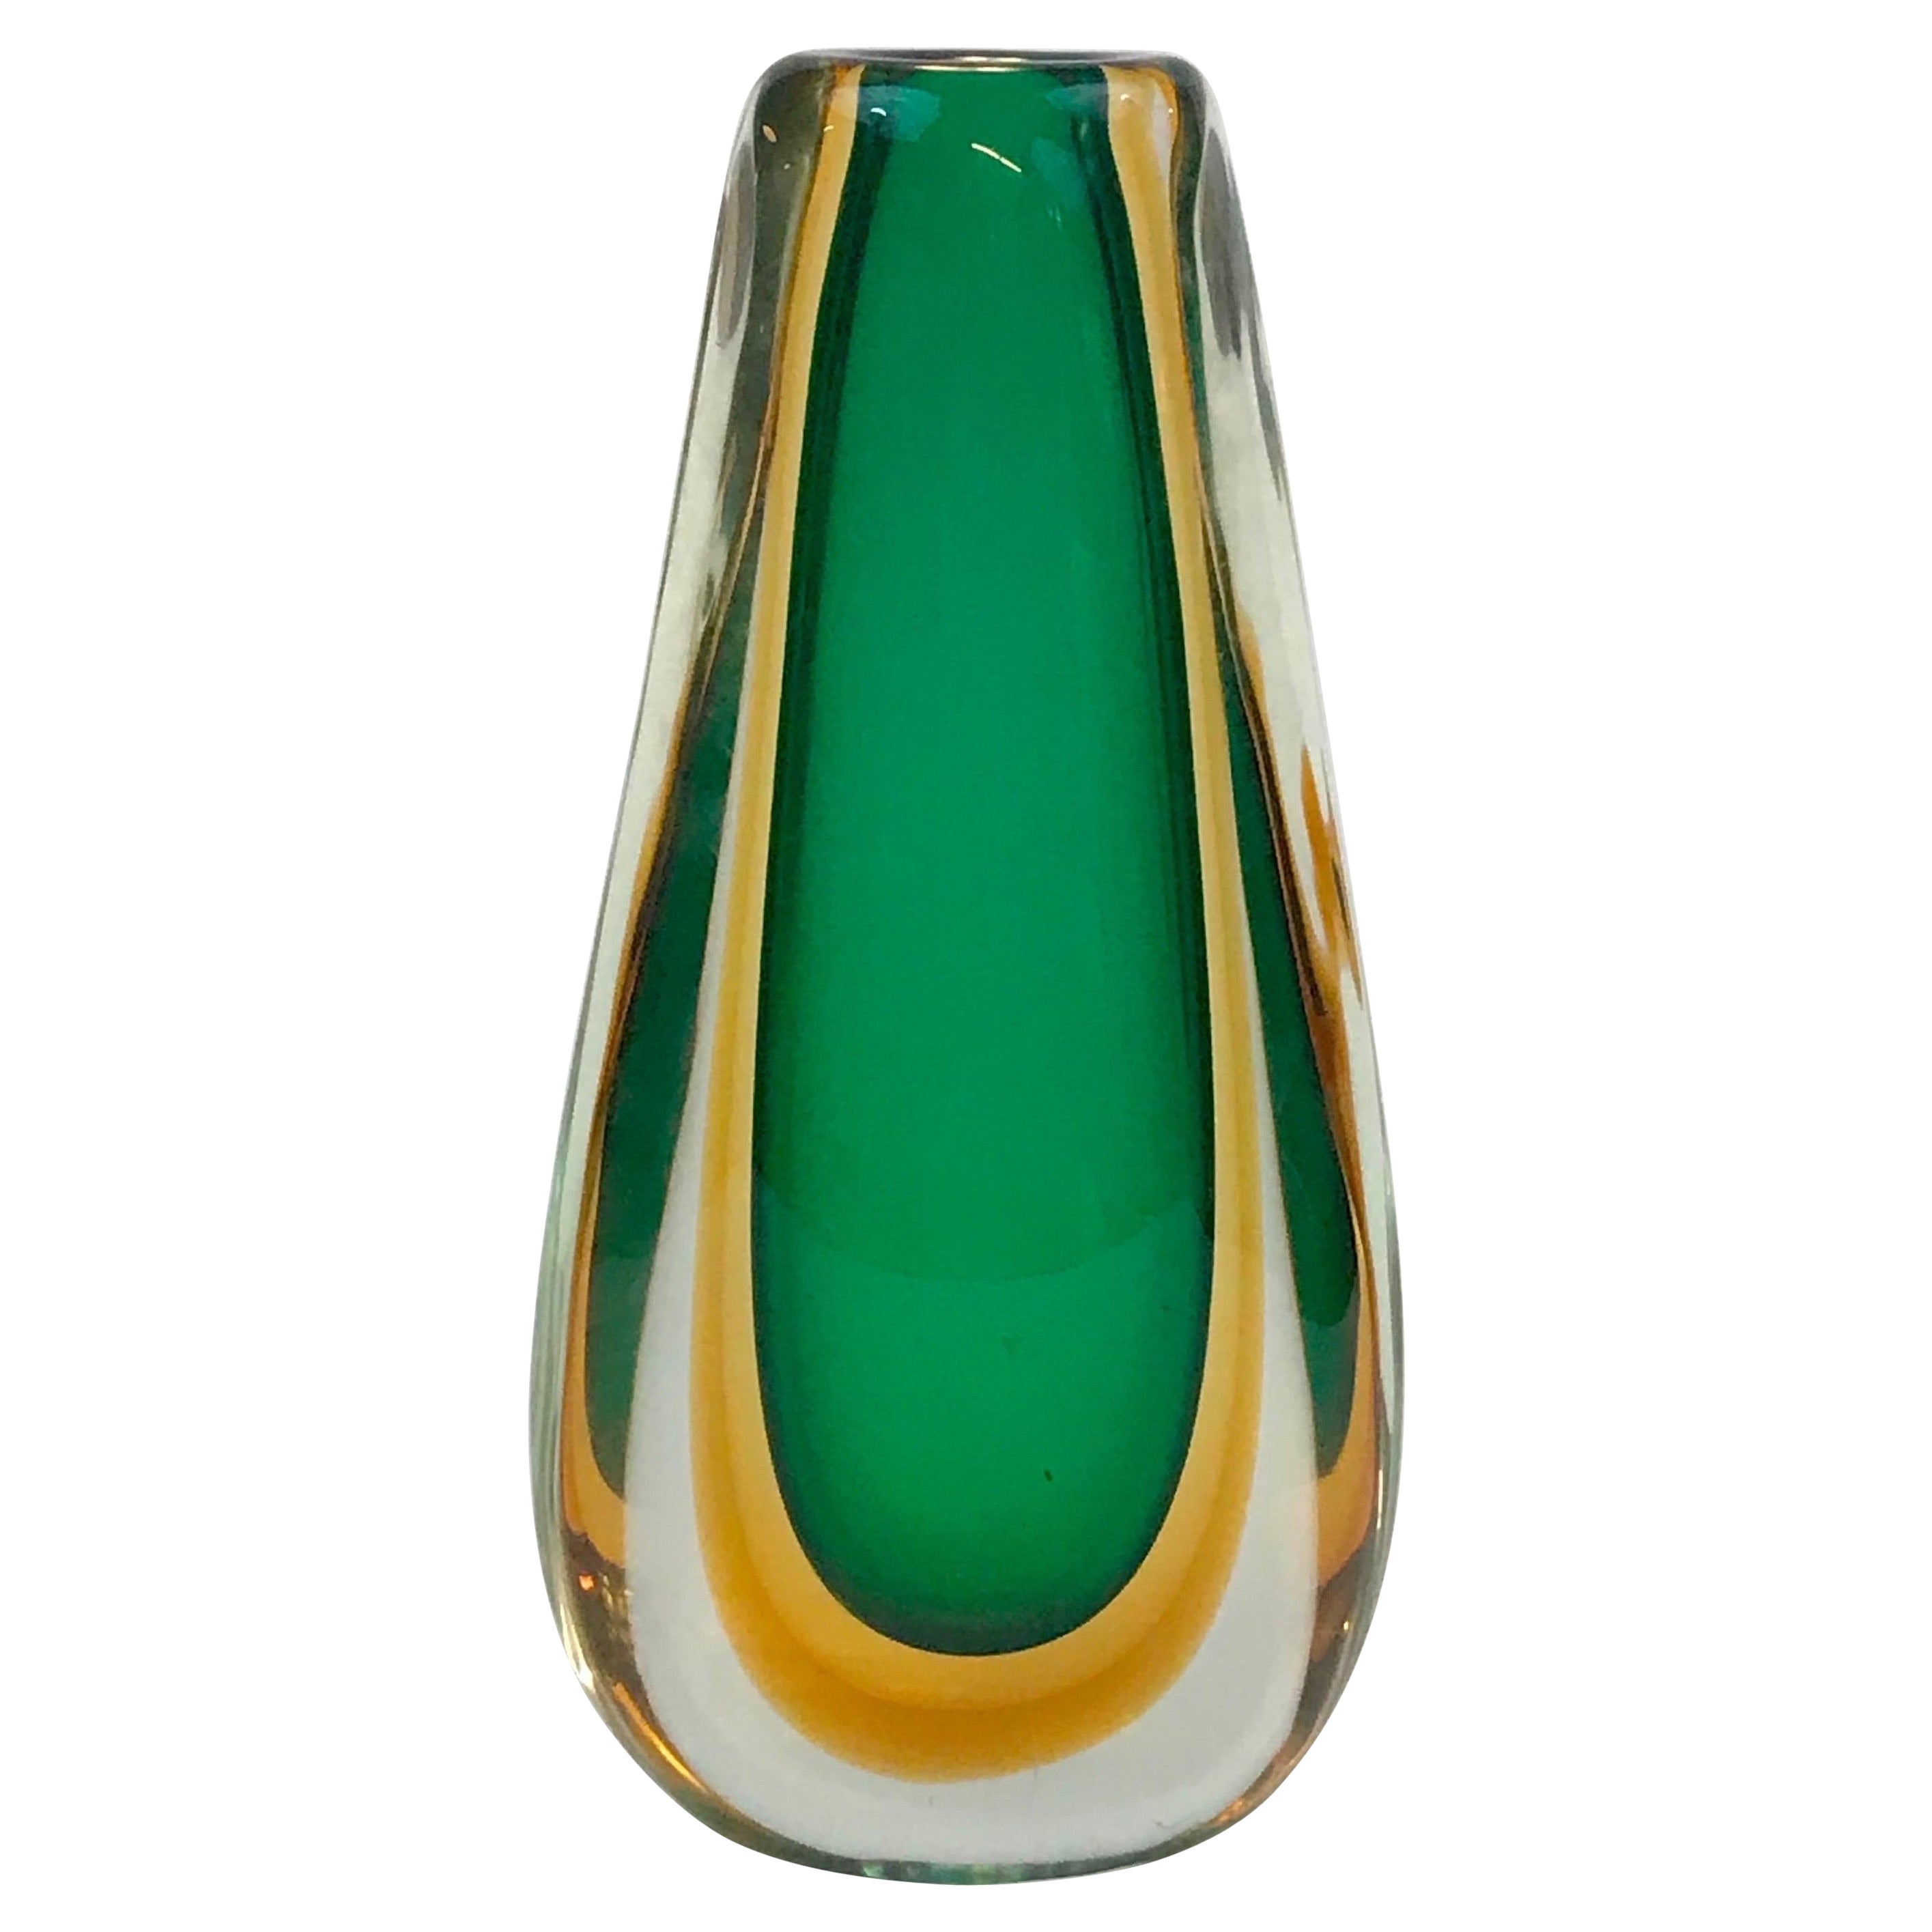 Tall Flavio Poli Sommerso Technique Vase in Clear, Amber and Green Glass For Sale